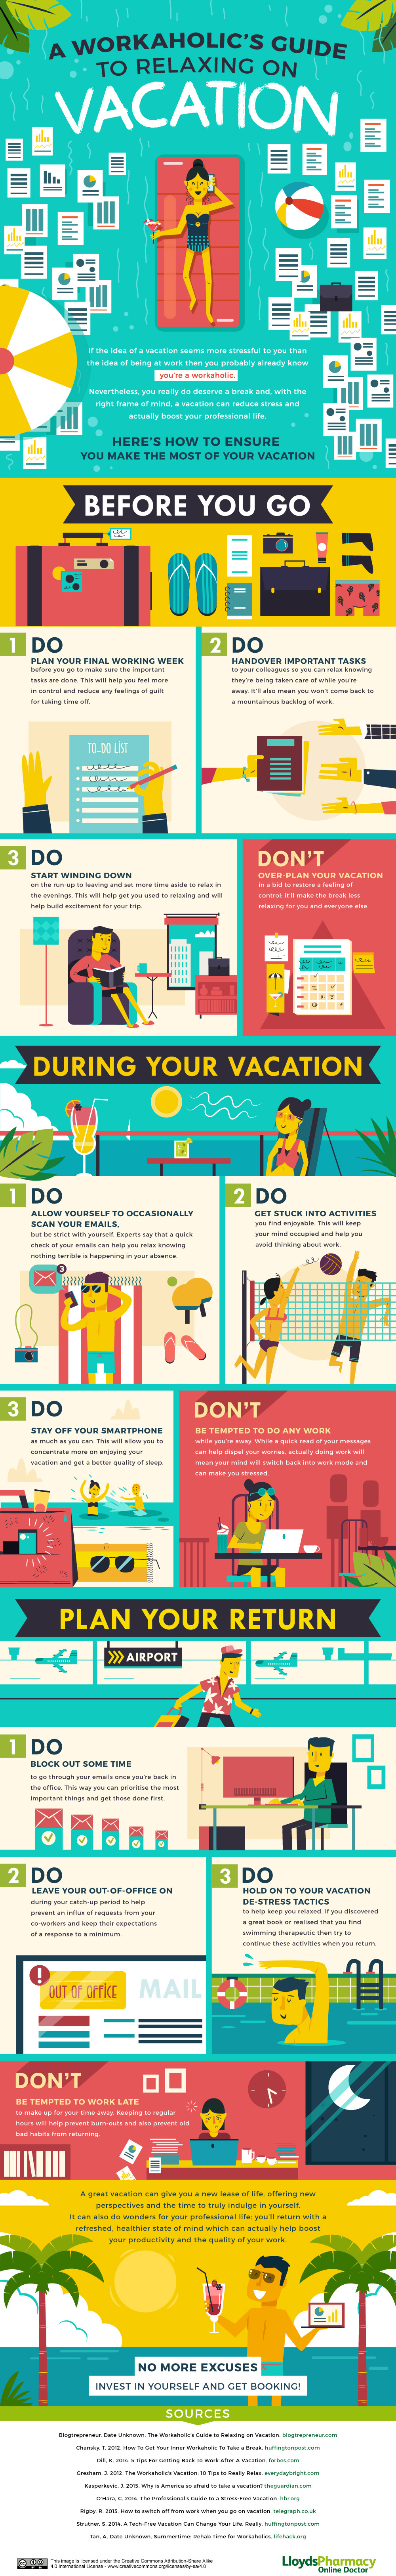 Infographic WorkaholicsGuidetoVacation 0